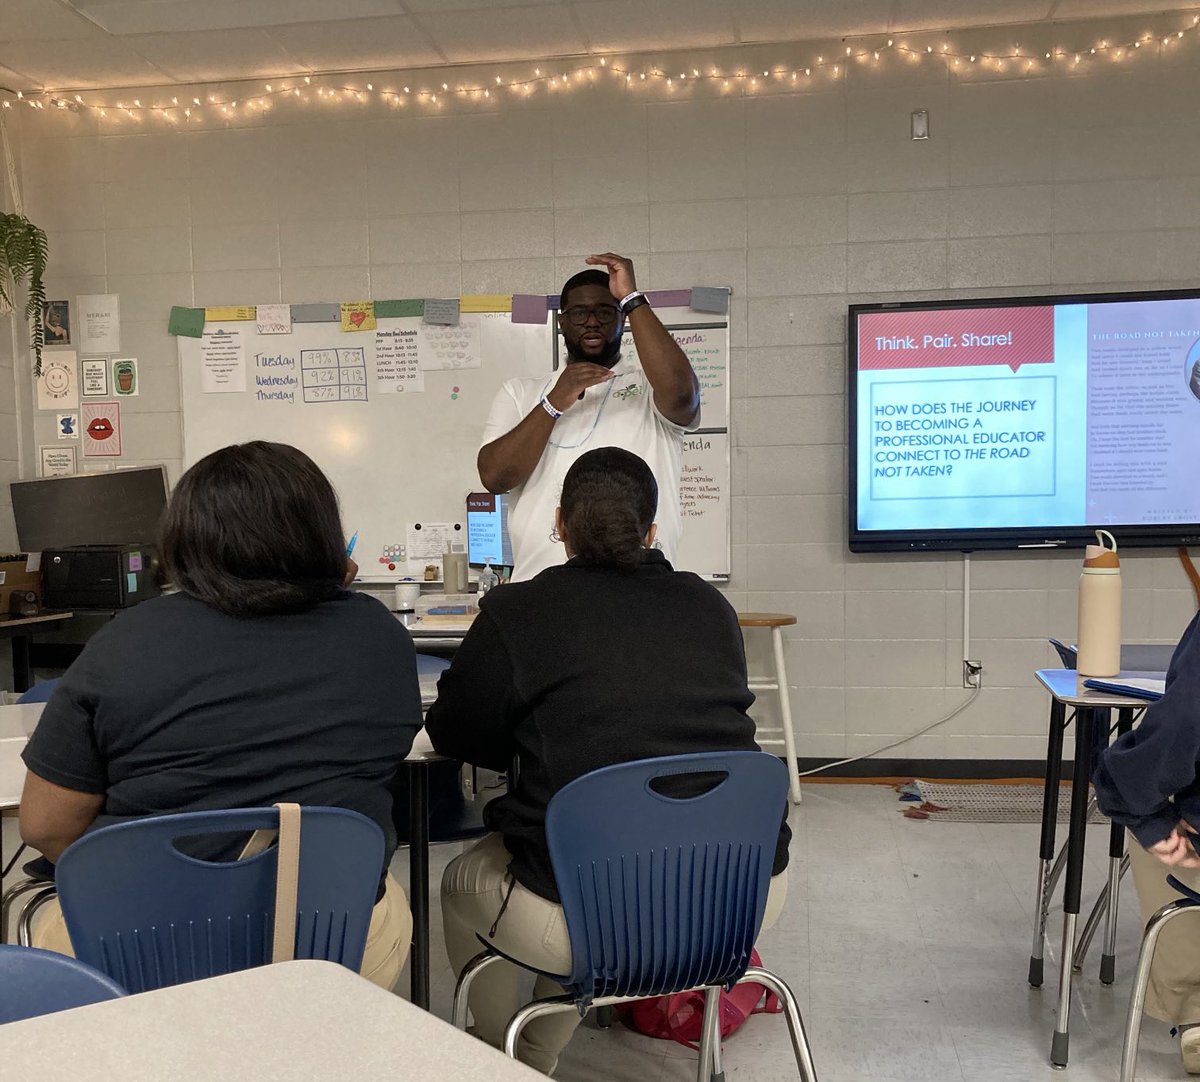 Torrence Williams- of ⁦@goAPEL⁩ and ⁦@ReachUniversity⁩ speaks to Pahs ⁦@EducatorsRising⁩ about Culture. Sharing a great thought by Bill Daggett- “Culture Trumps Strategy” ⁦@breannarguidry⁩ ⁦@torwms⁩ ⁦@PortAllenPels⁩ ⁦@WBRSchools⁩ ❤️❤️❤️